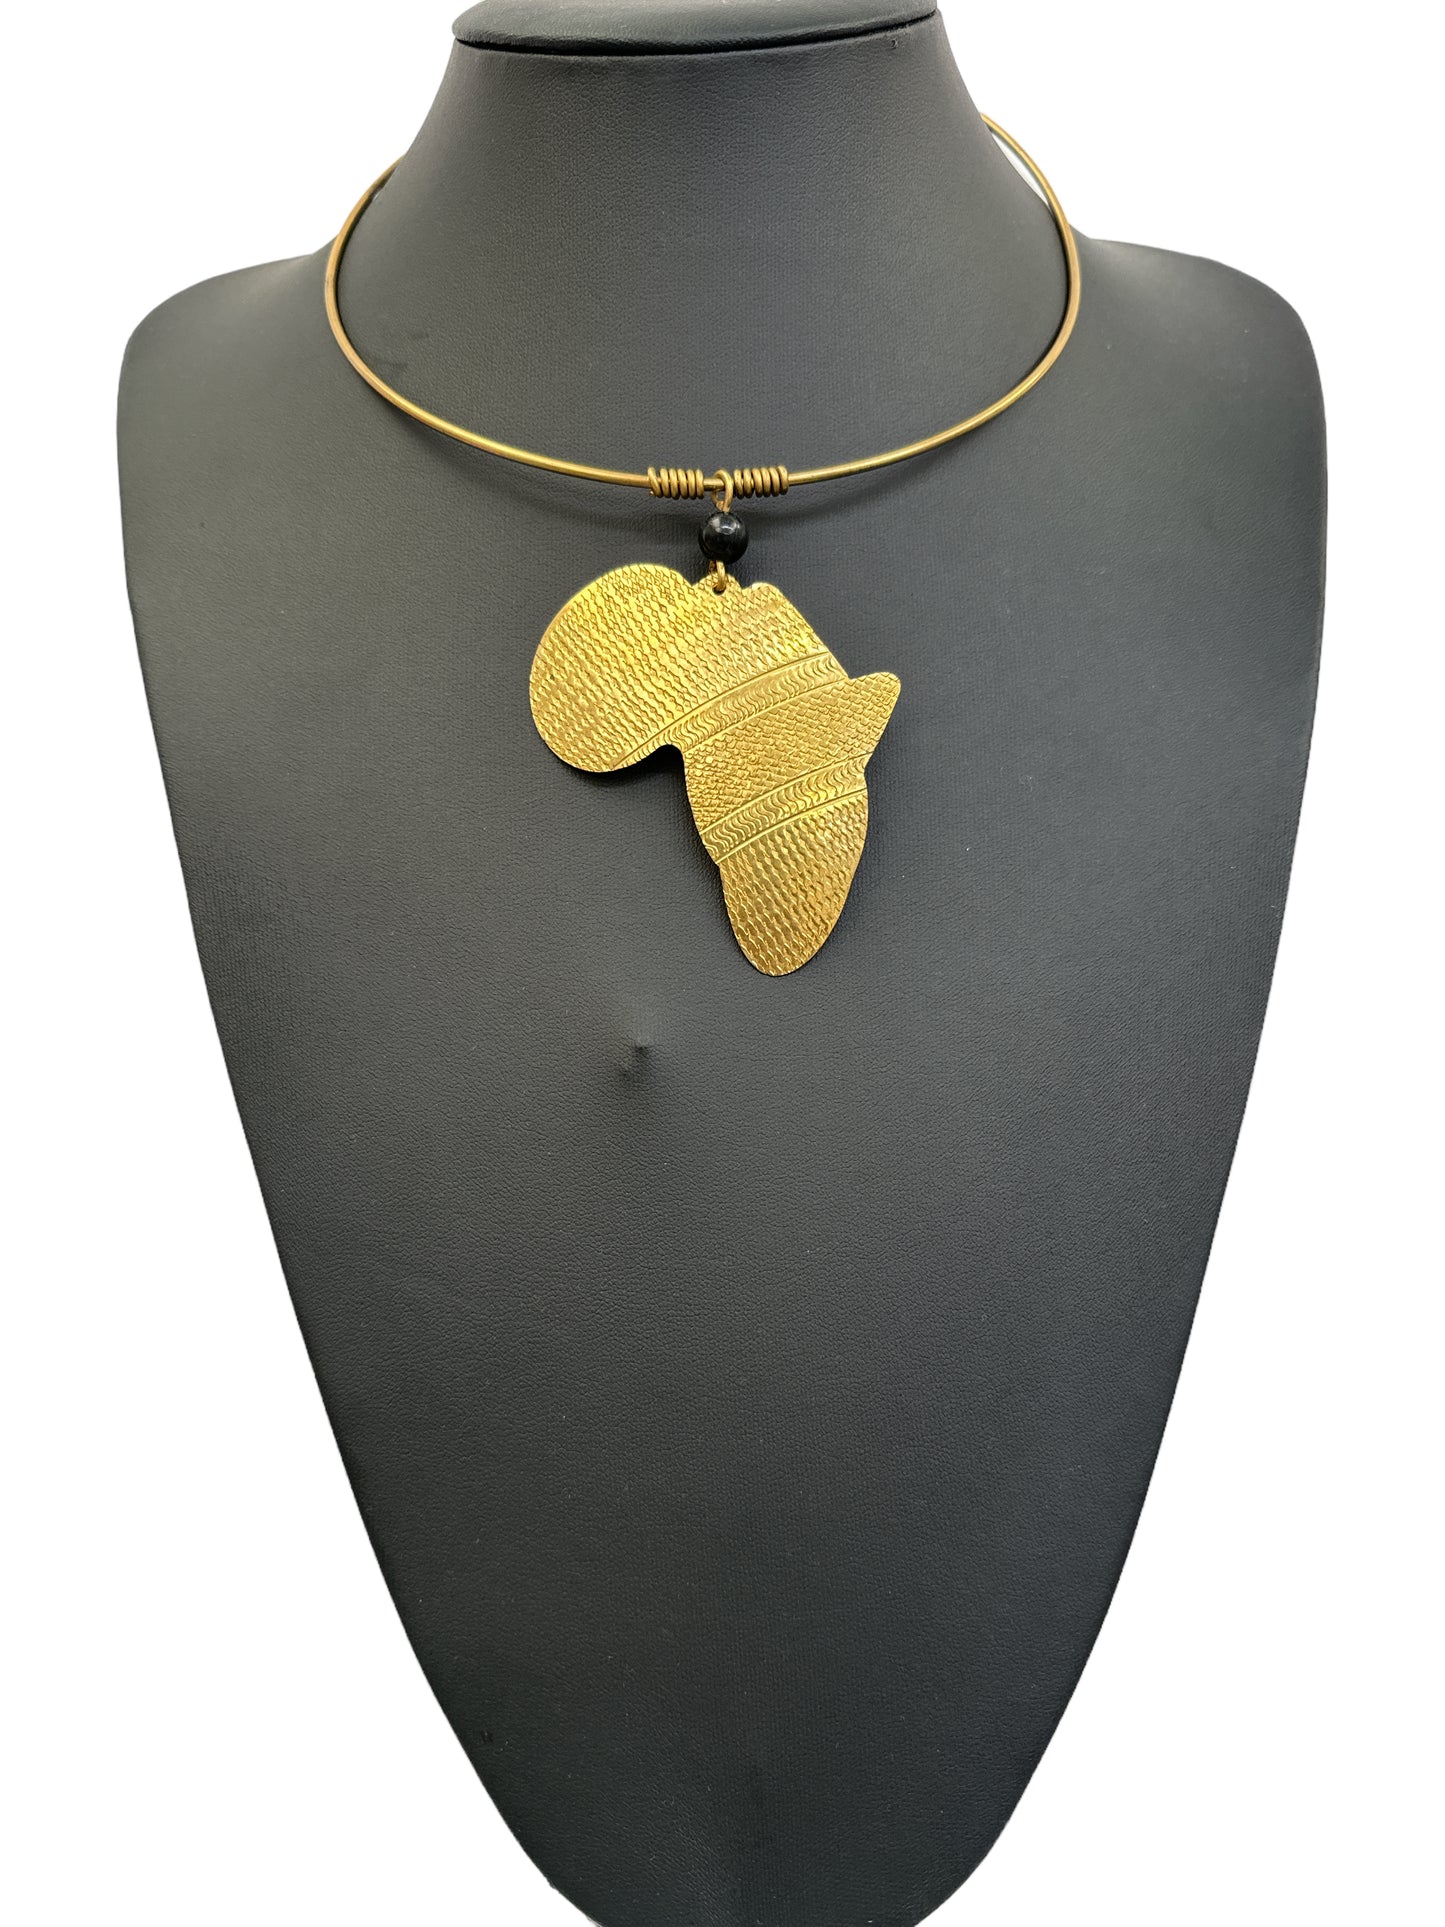 AFRICA MAP BRASS METAL PENDANT NECKLACE